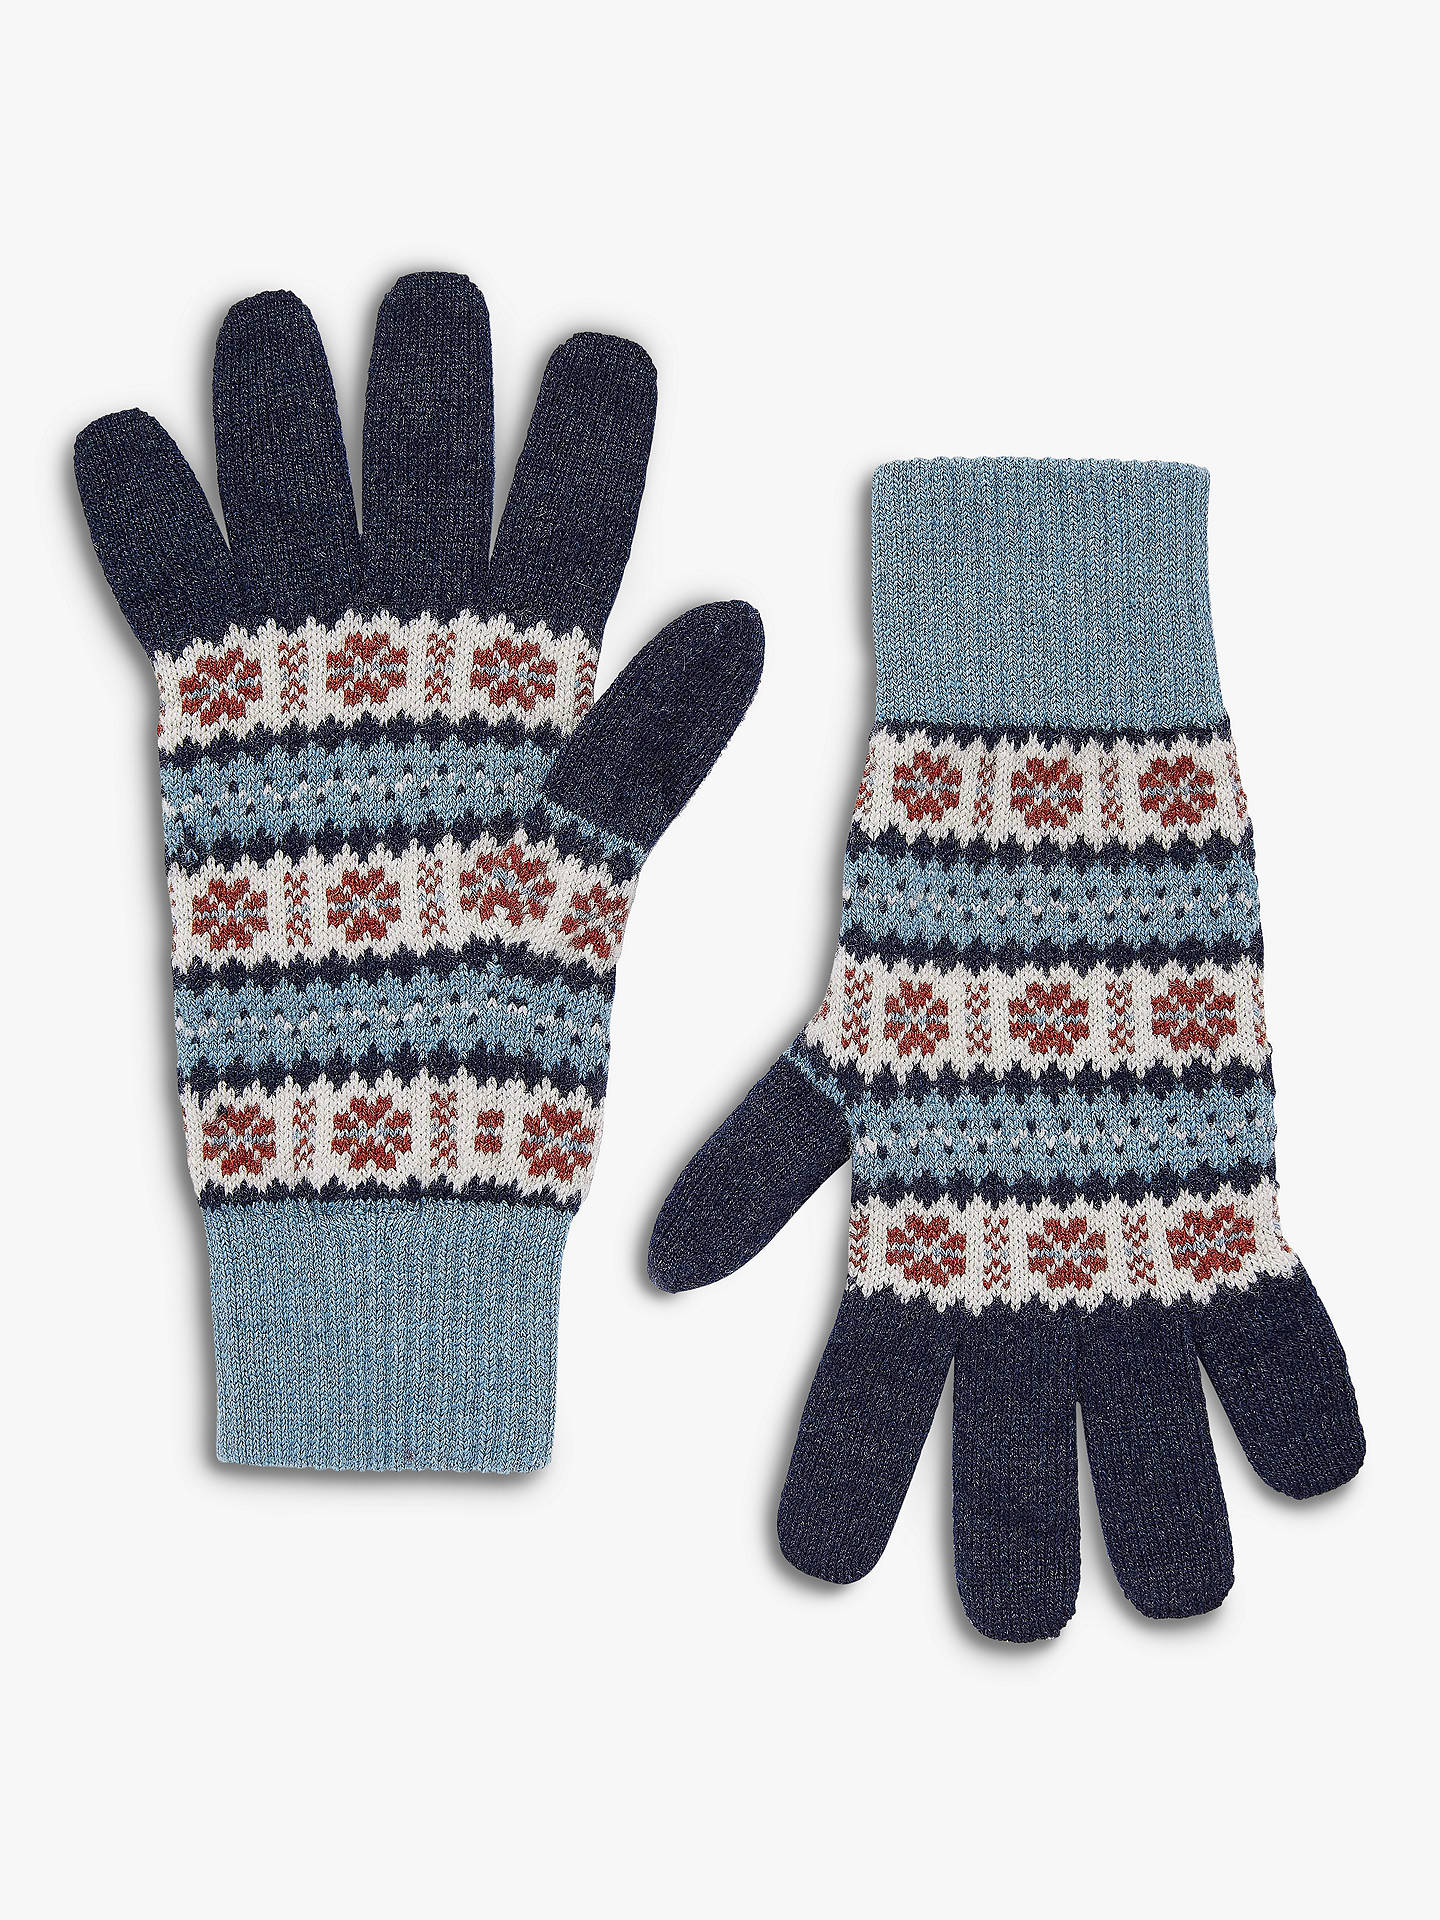 Brora Fair Isle Cashmere Gloves, French Navy/Mist at John Lewis & Partners